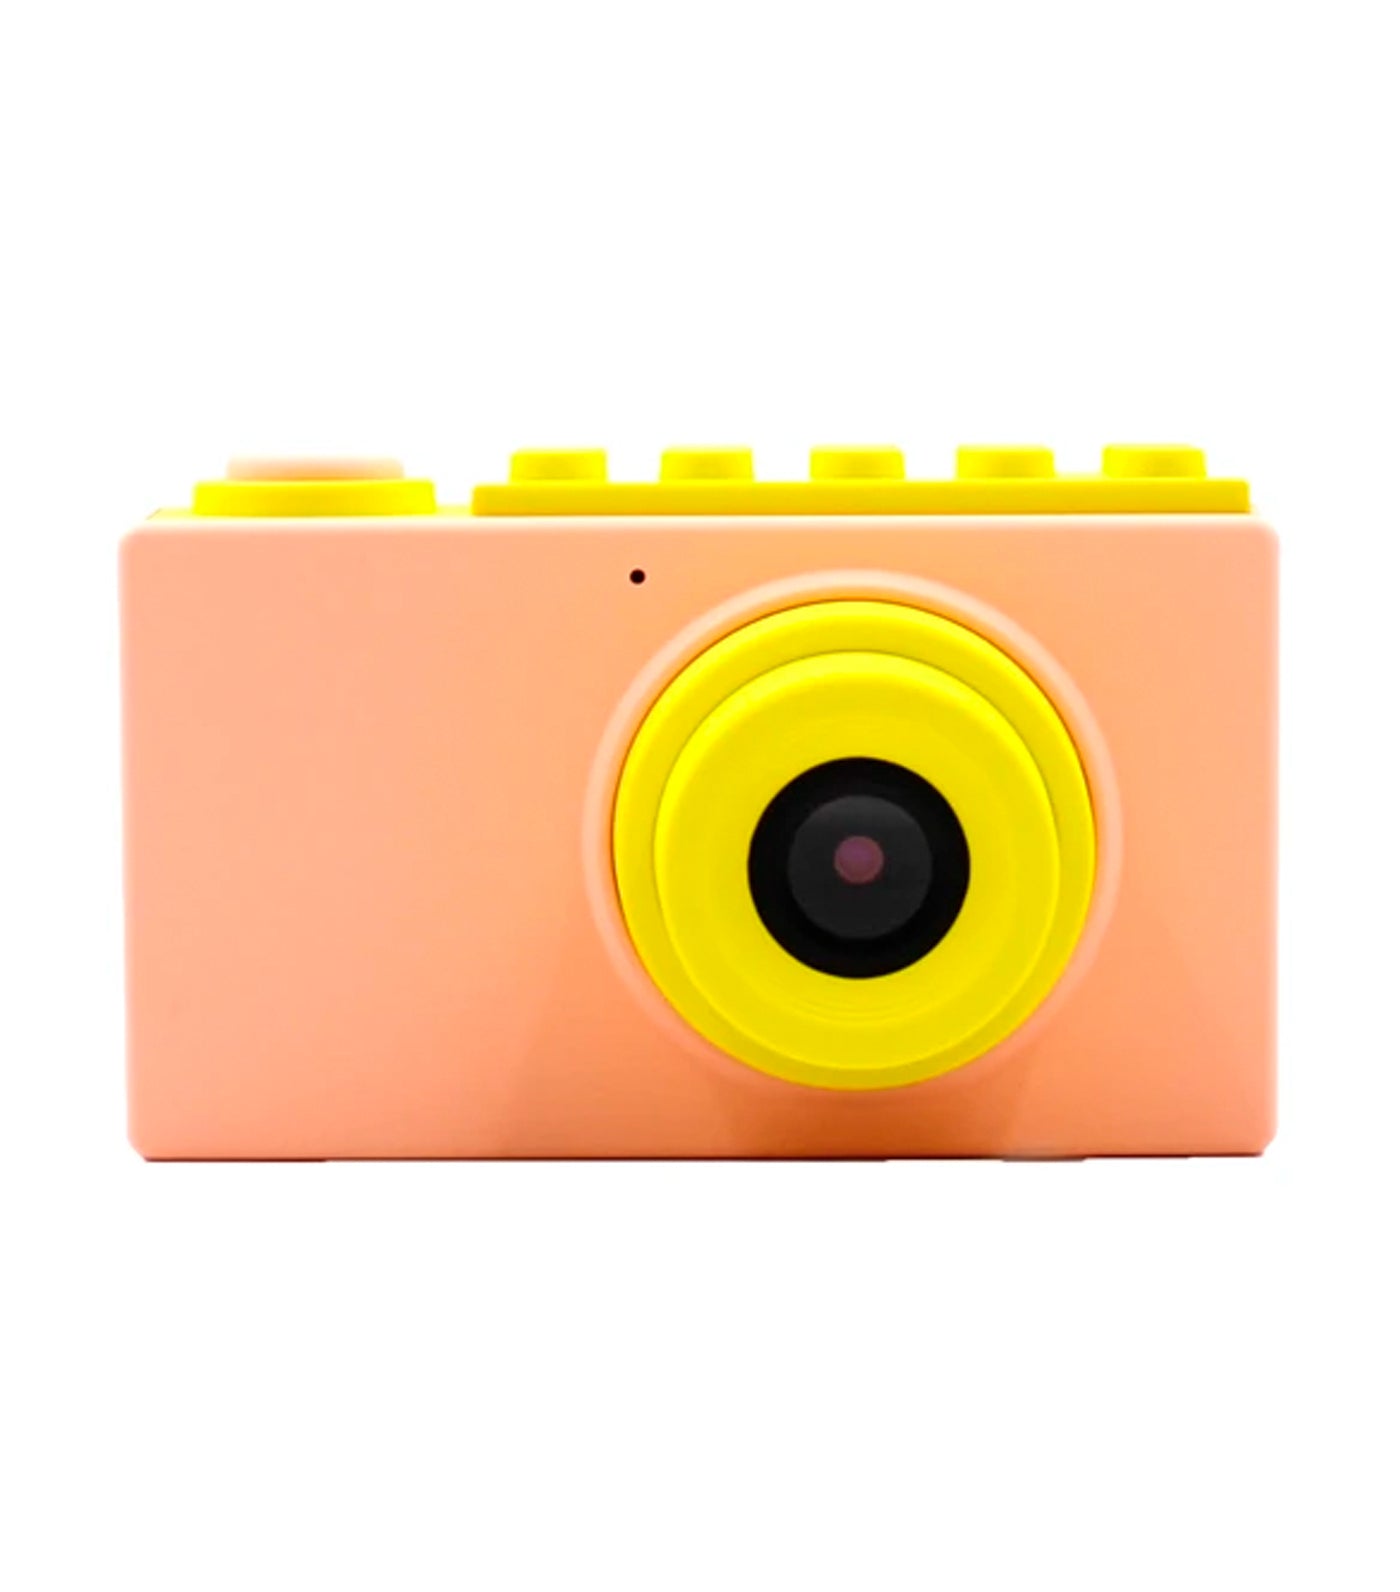 myfirst pink camera 2 - 8mp camera for kids with waterproof case 